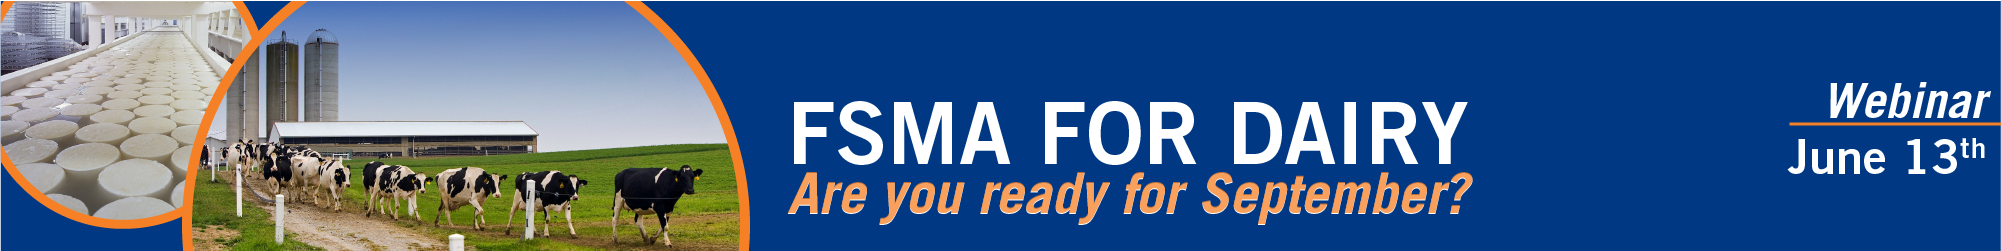 FSMA for Dairy: Are You Ready for September? 